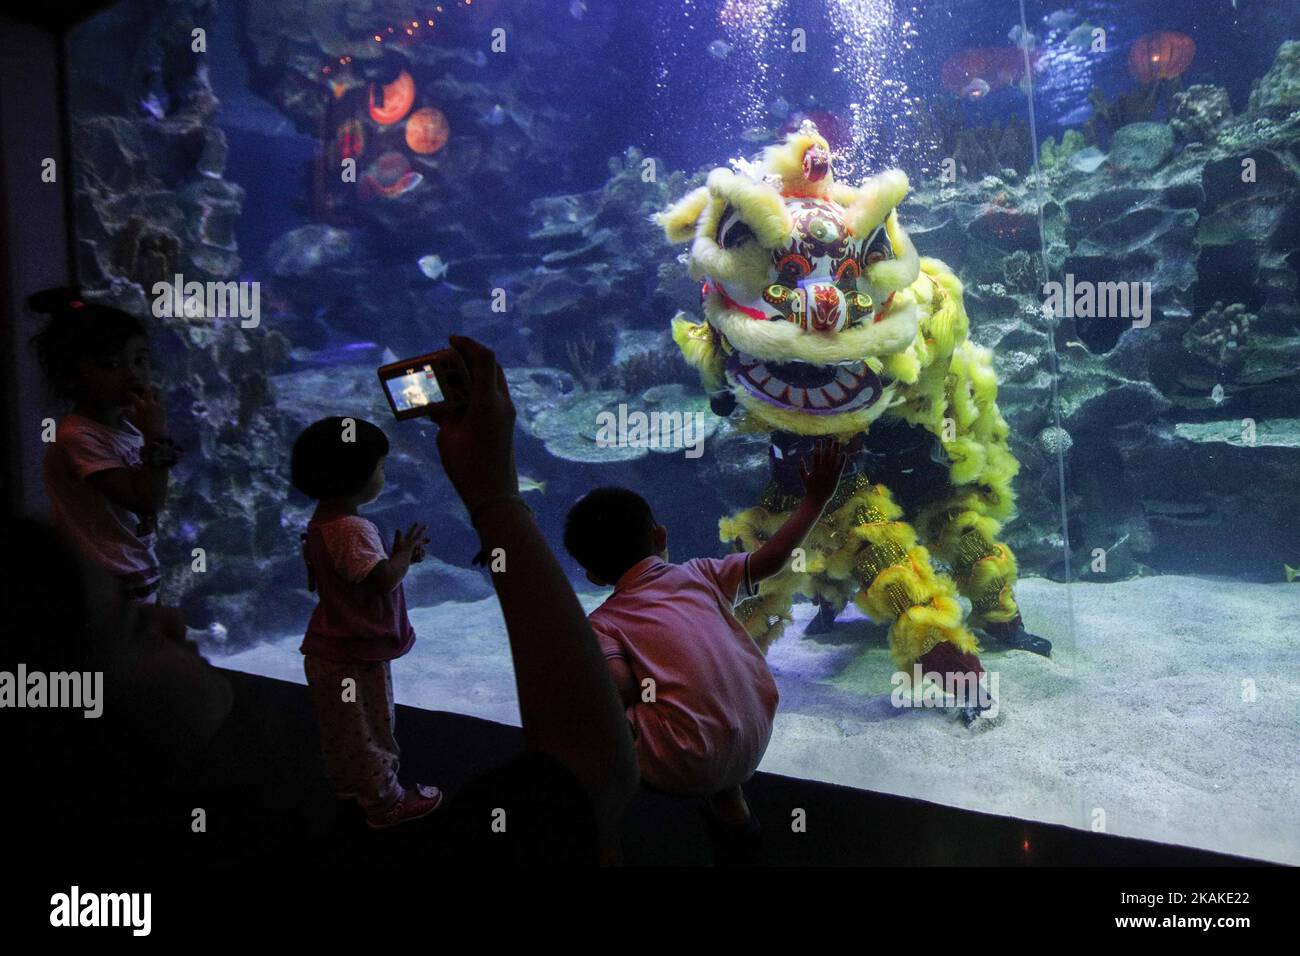 Divers wearing a Chinese traditional lion costume perform a lion dance in the water inconjuction of this Lunar New Year of the rooster at Aquaria KLCC, in Kuala Lumpur, Malaysia, on January 27, 2017. The Lunar New Year will mark the start of the 'Year of the Rooster' on January 28. (Photo by Hafiz Sohaimi/NurPhoto) *** Please Use Credit from Credit Field *** Stock Photo